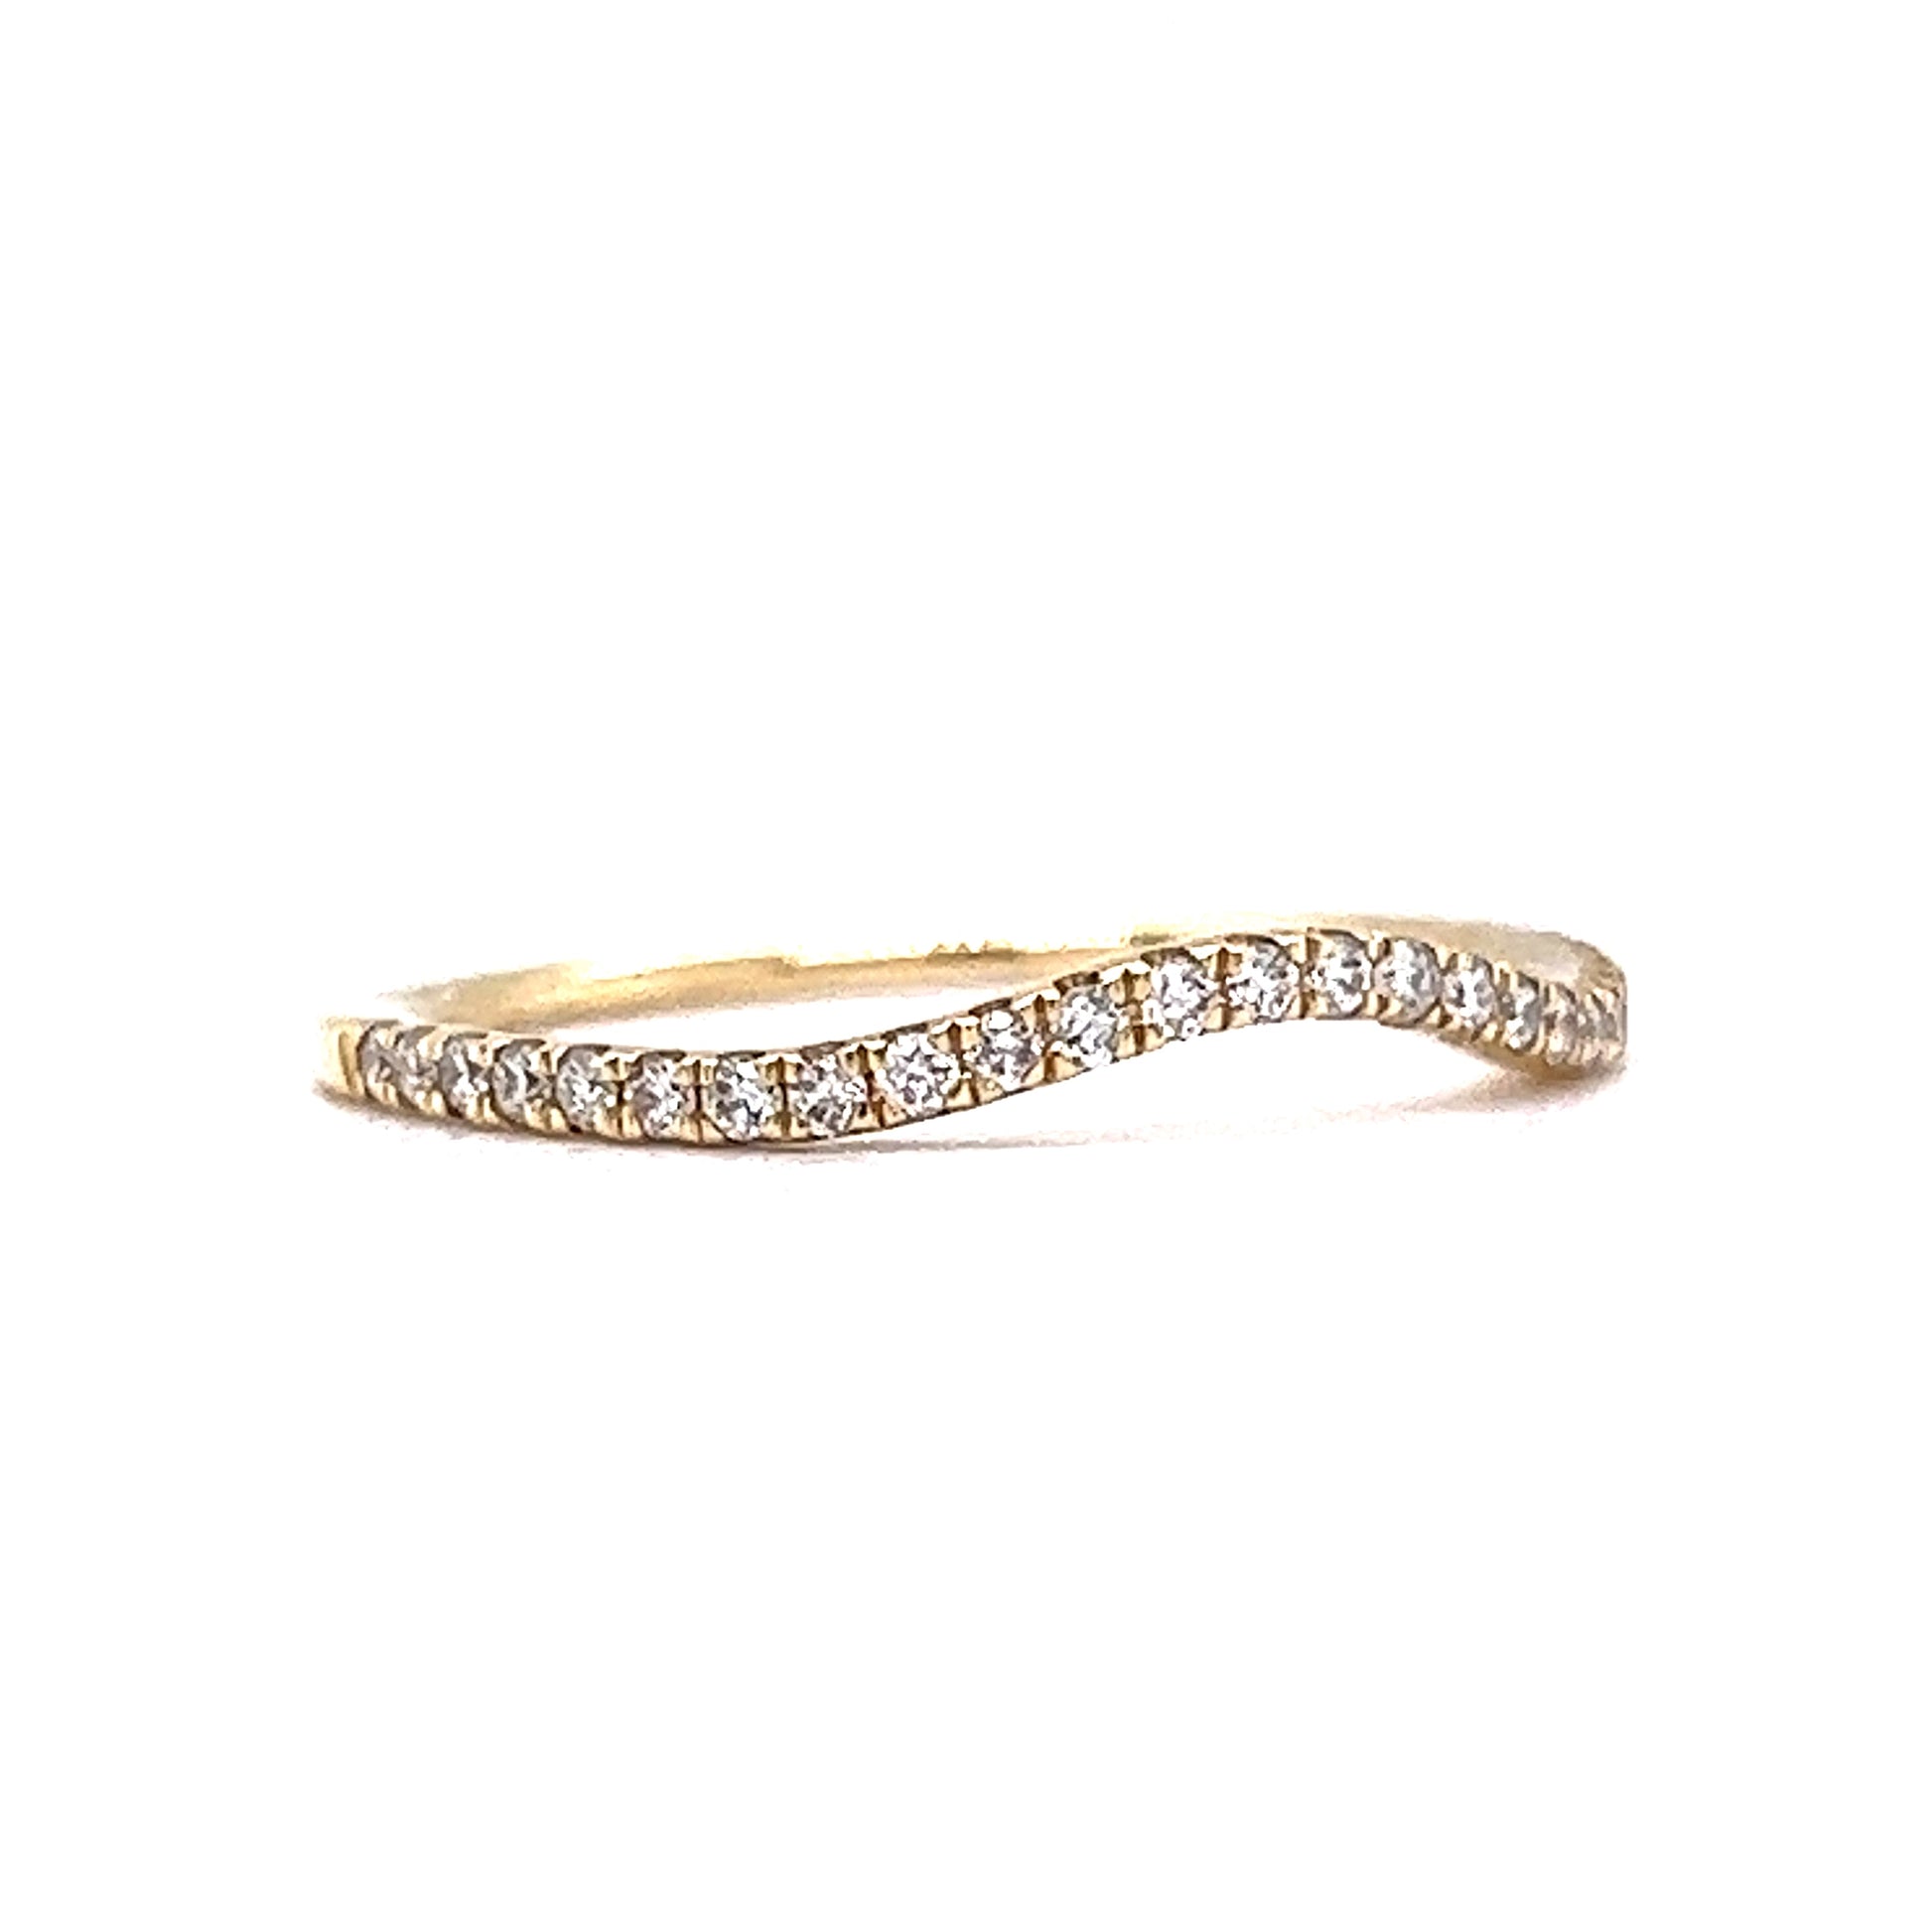 Thin Curved Diamond Wedding Band in 14k Yellow GoldComposition: 14 Karat Yellow Gold Ring Size: 6.5 Total Diamond Weight: .18ct Total Gram Weight: 1.1 g Inscription: 14k 585
      